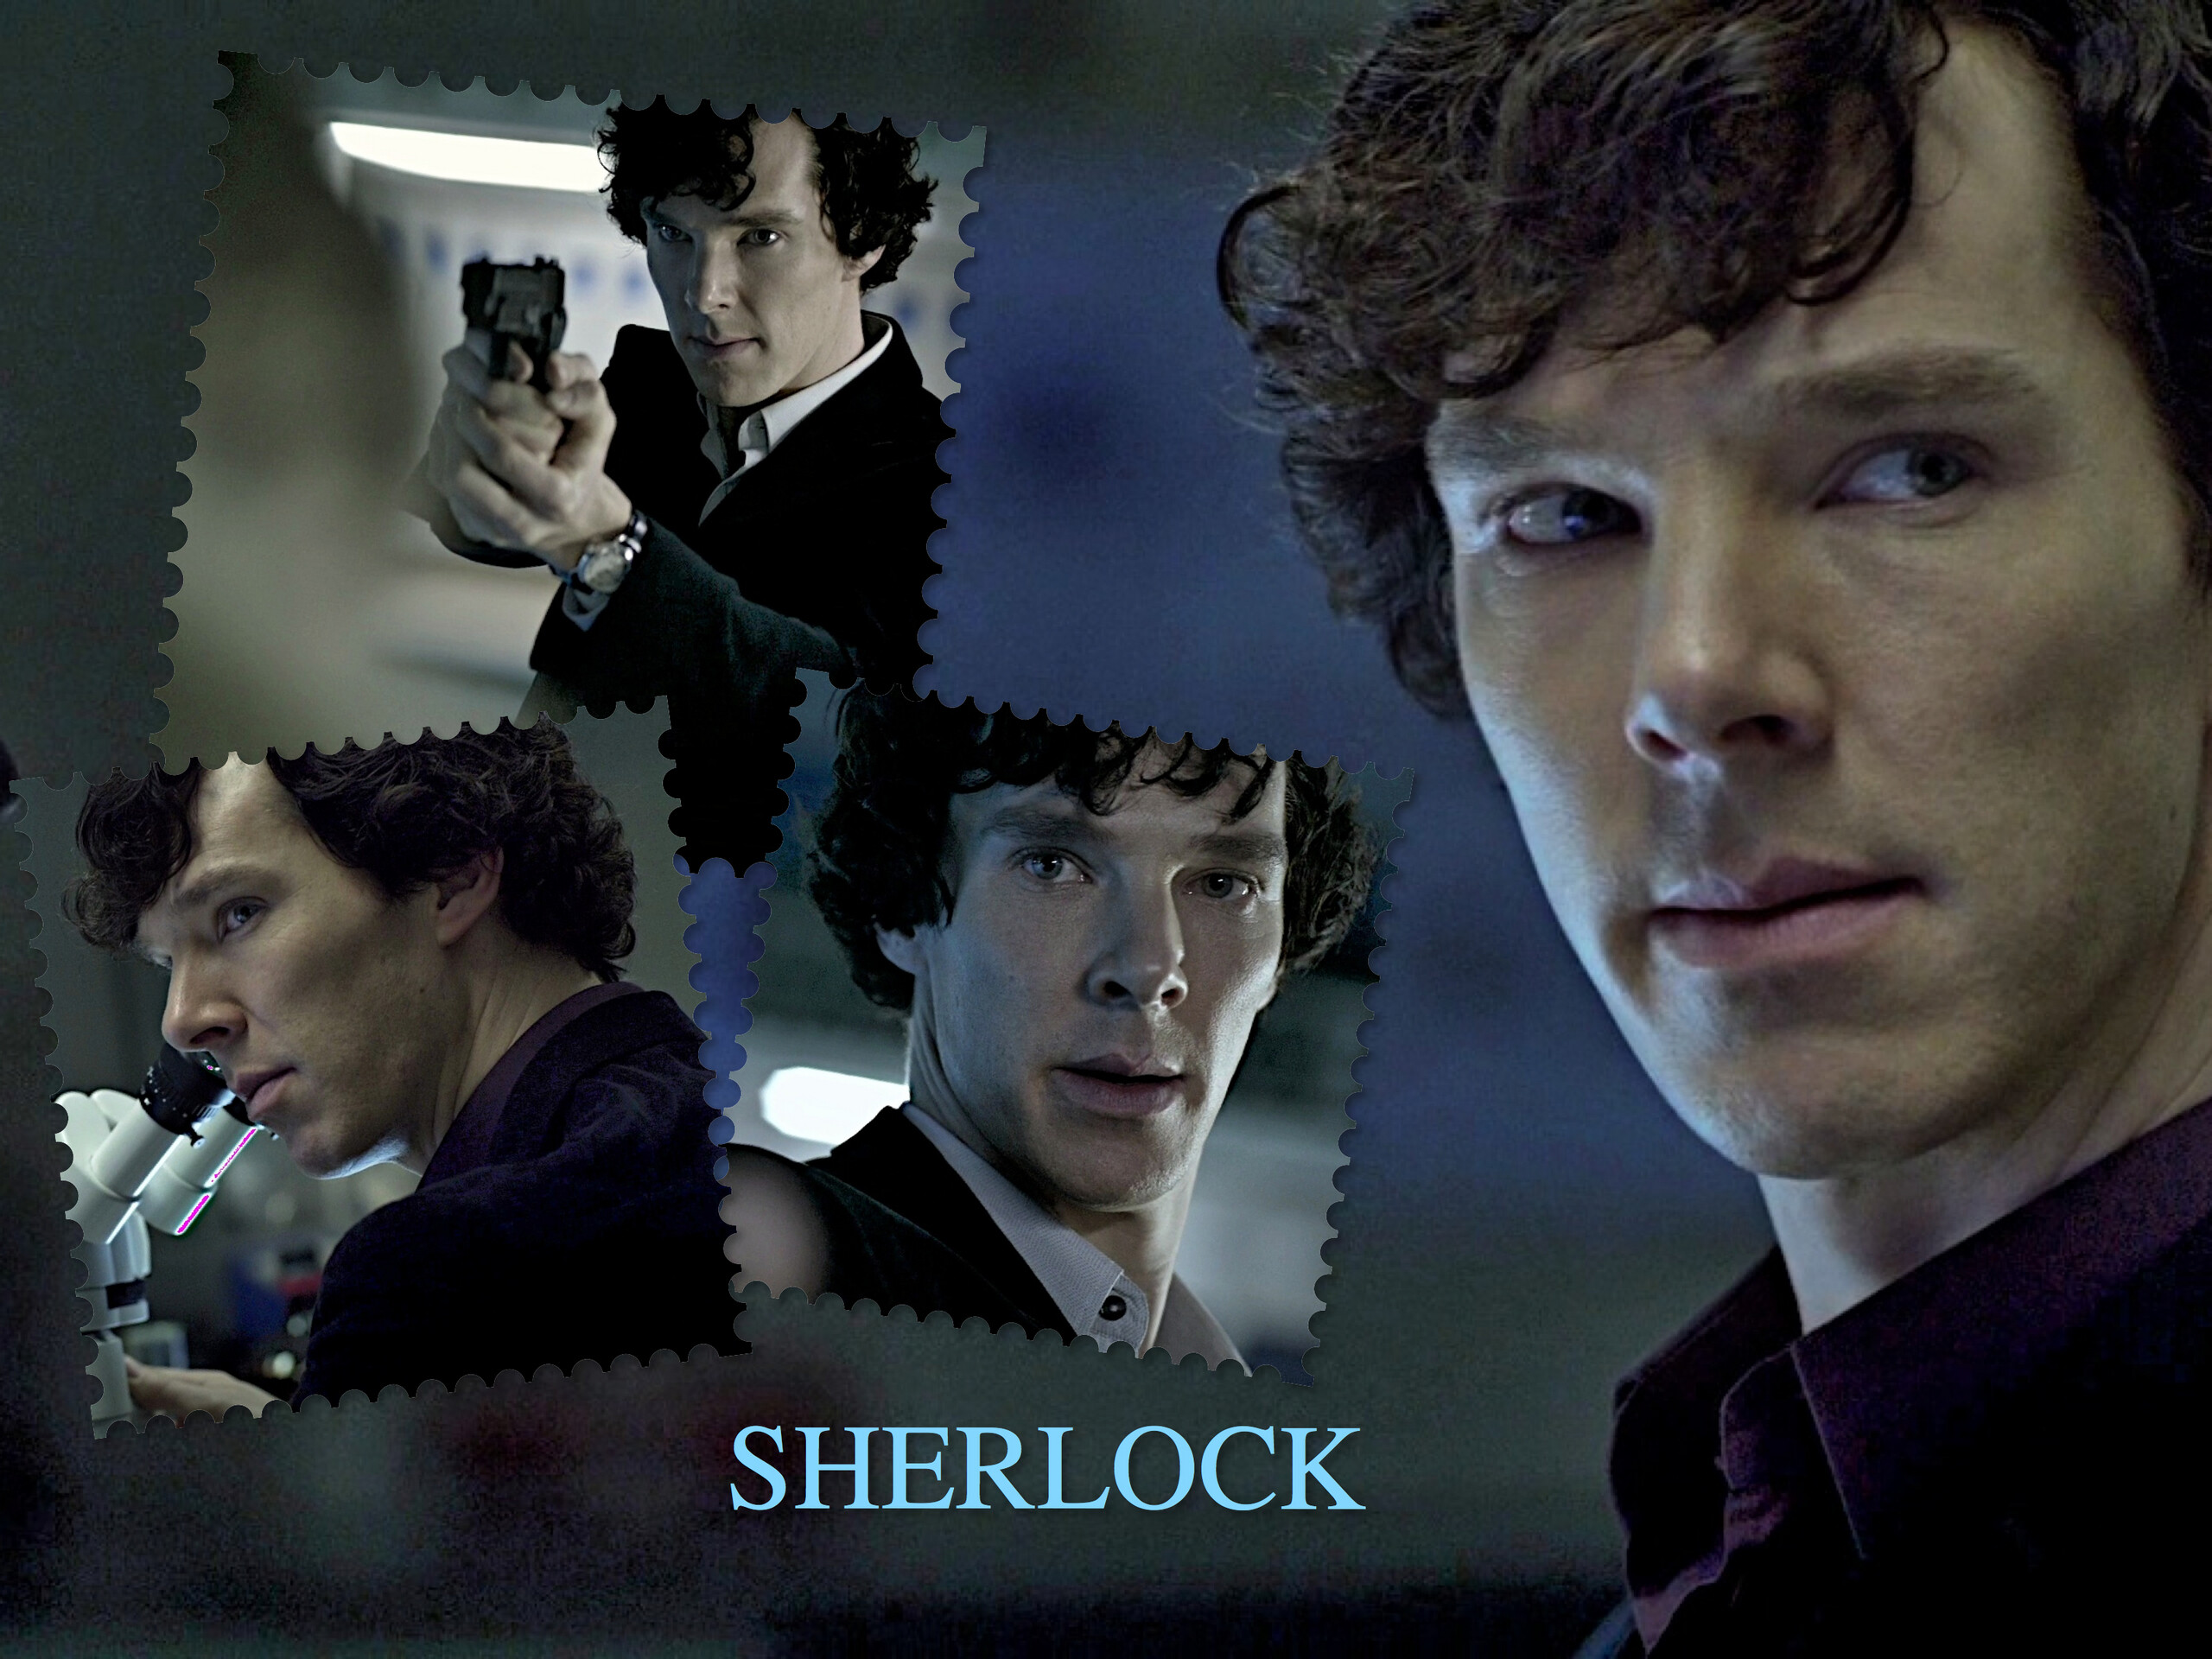 Sherlock (TV Series): Produced by the British network BBC, along with Hartswood Films. 2560x1920 HD Wallpaper.